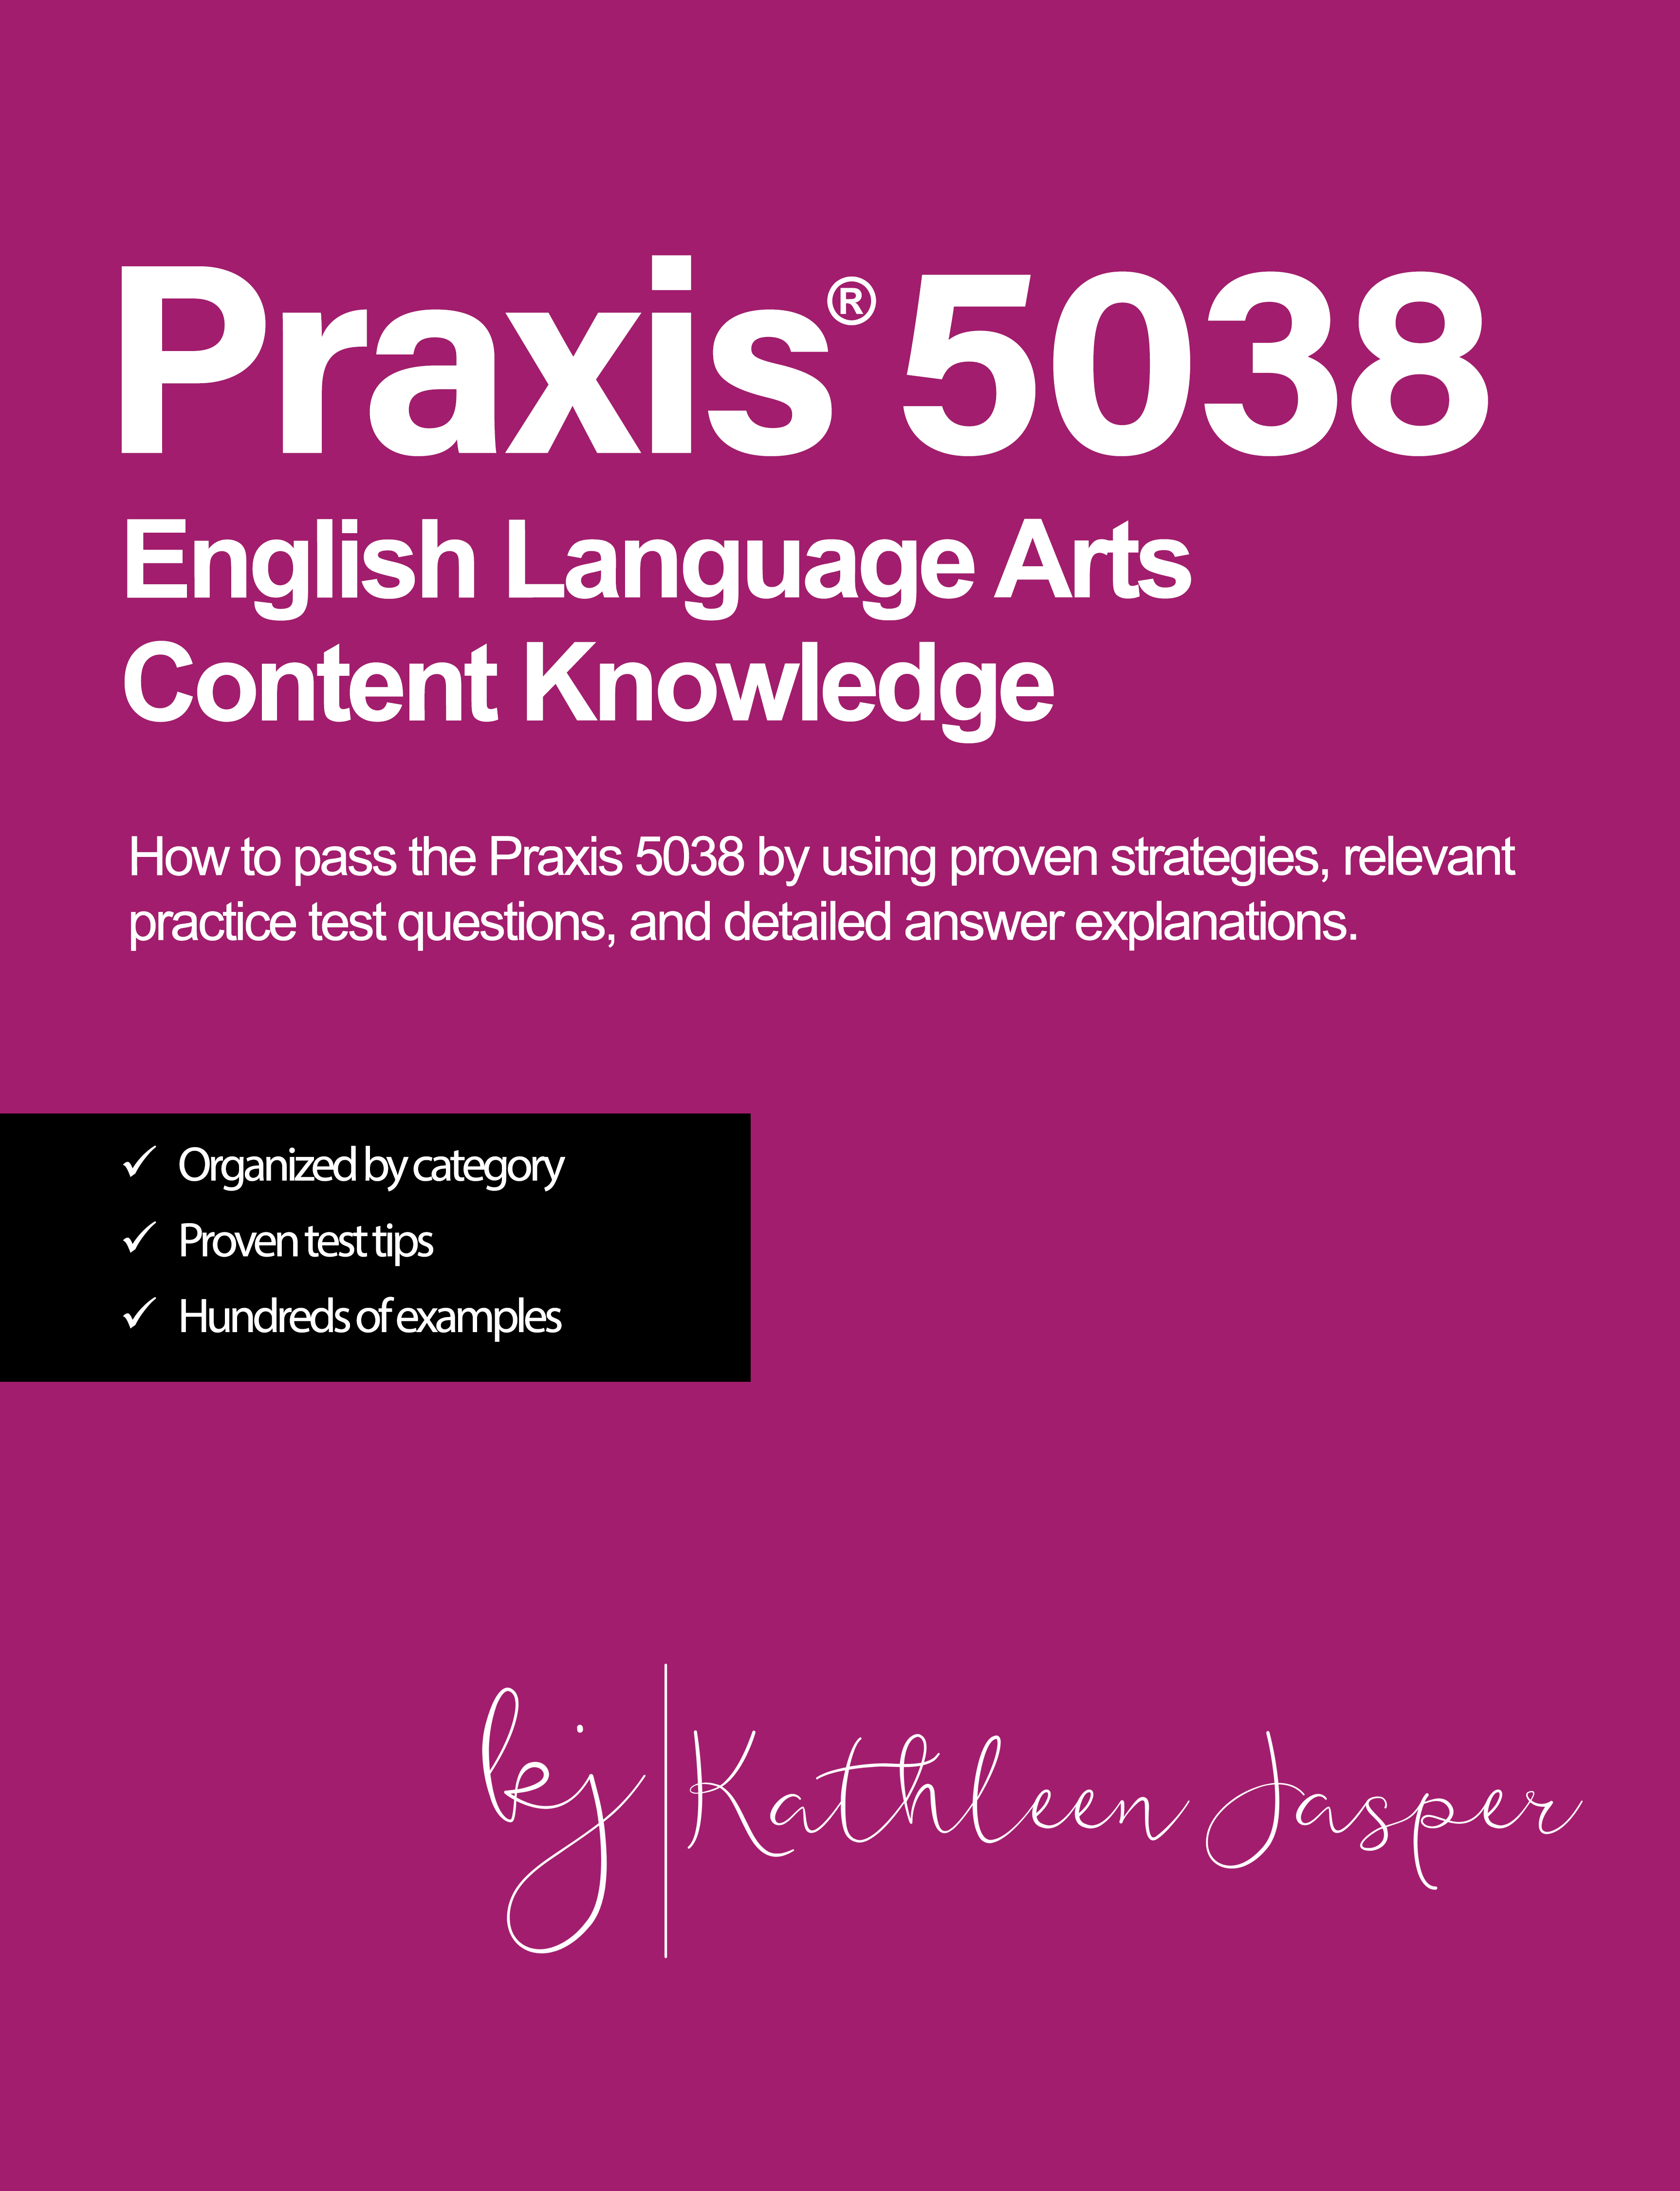 Praxis 5038 English Language Arts Content Knowledge - Digital Study Guide